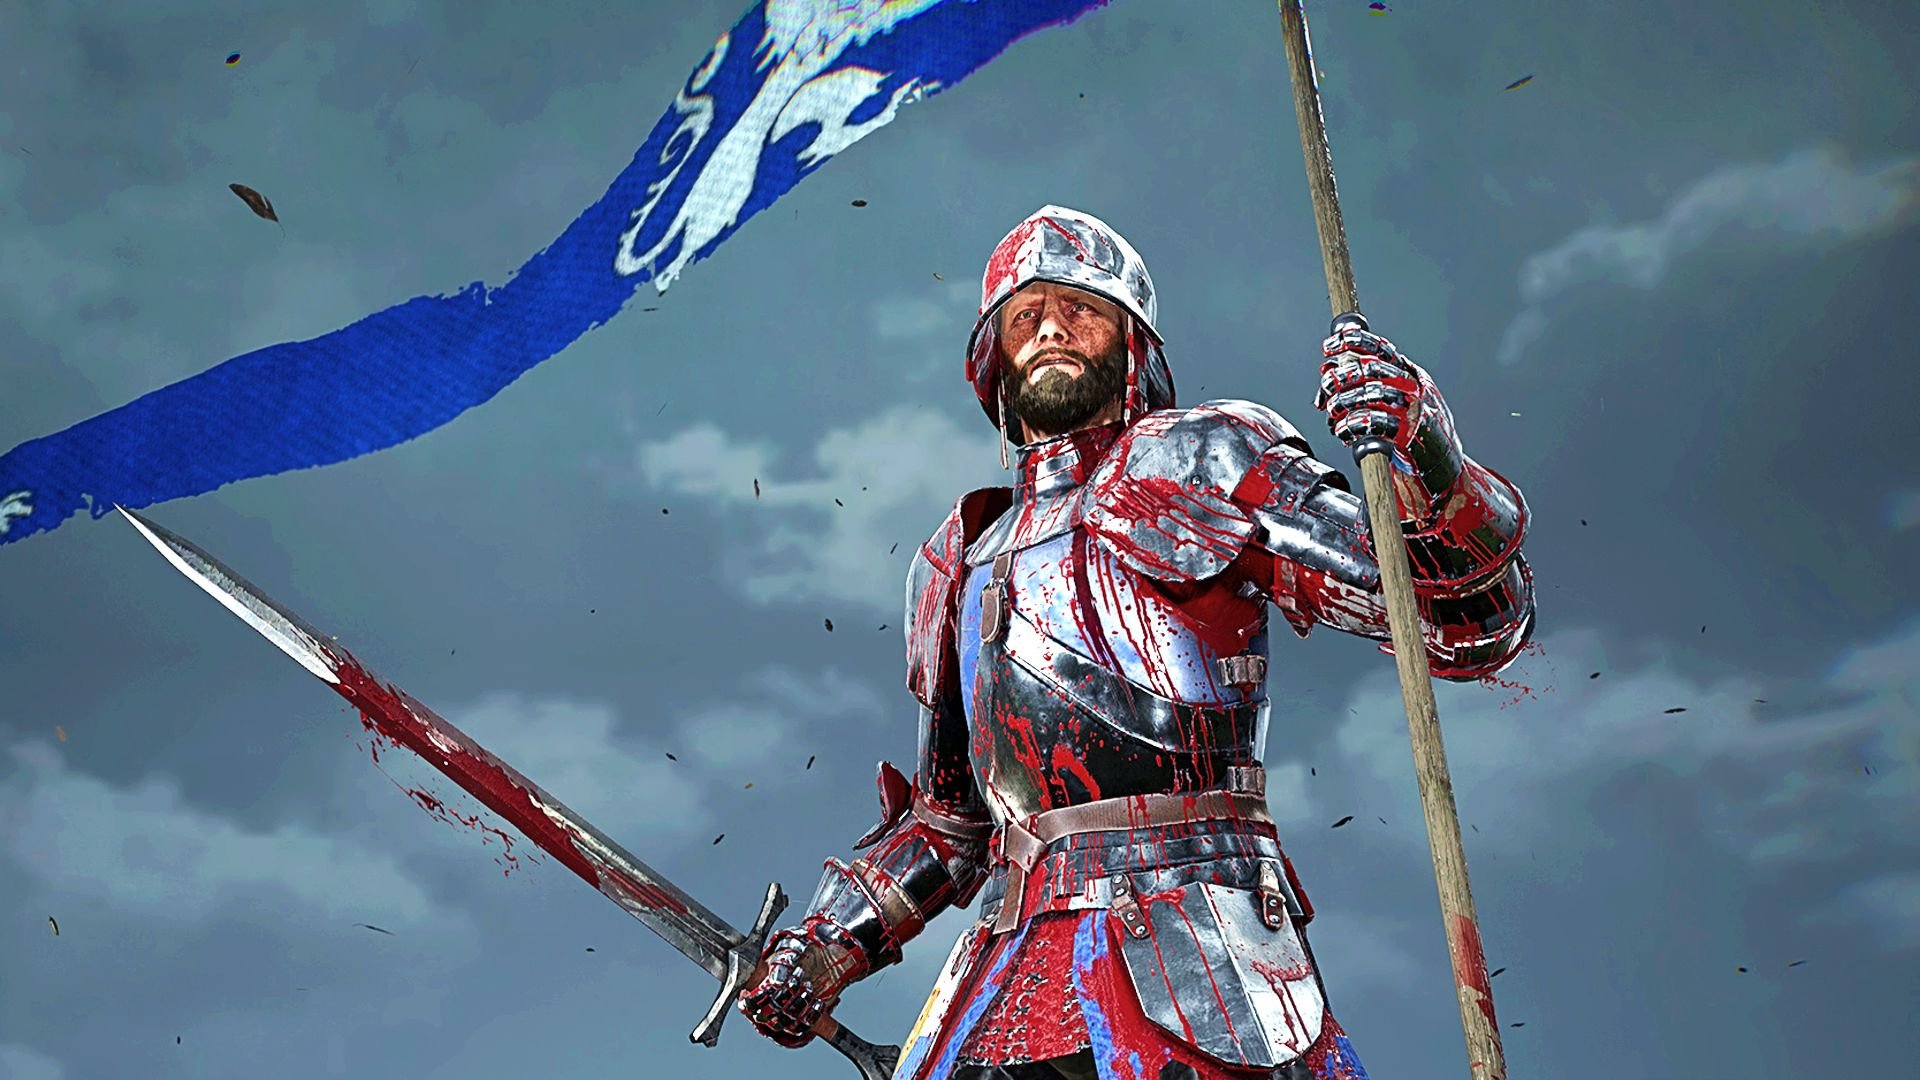 ps4 chivalry download